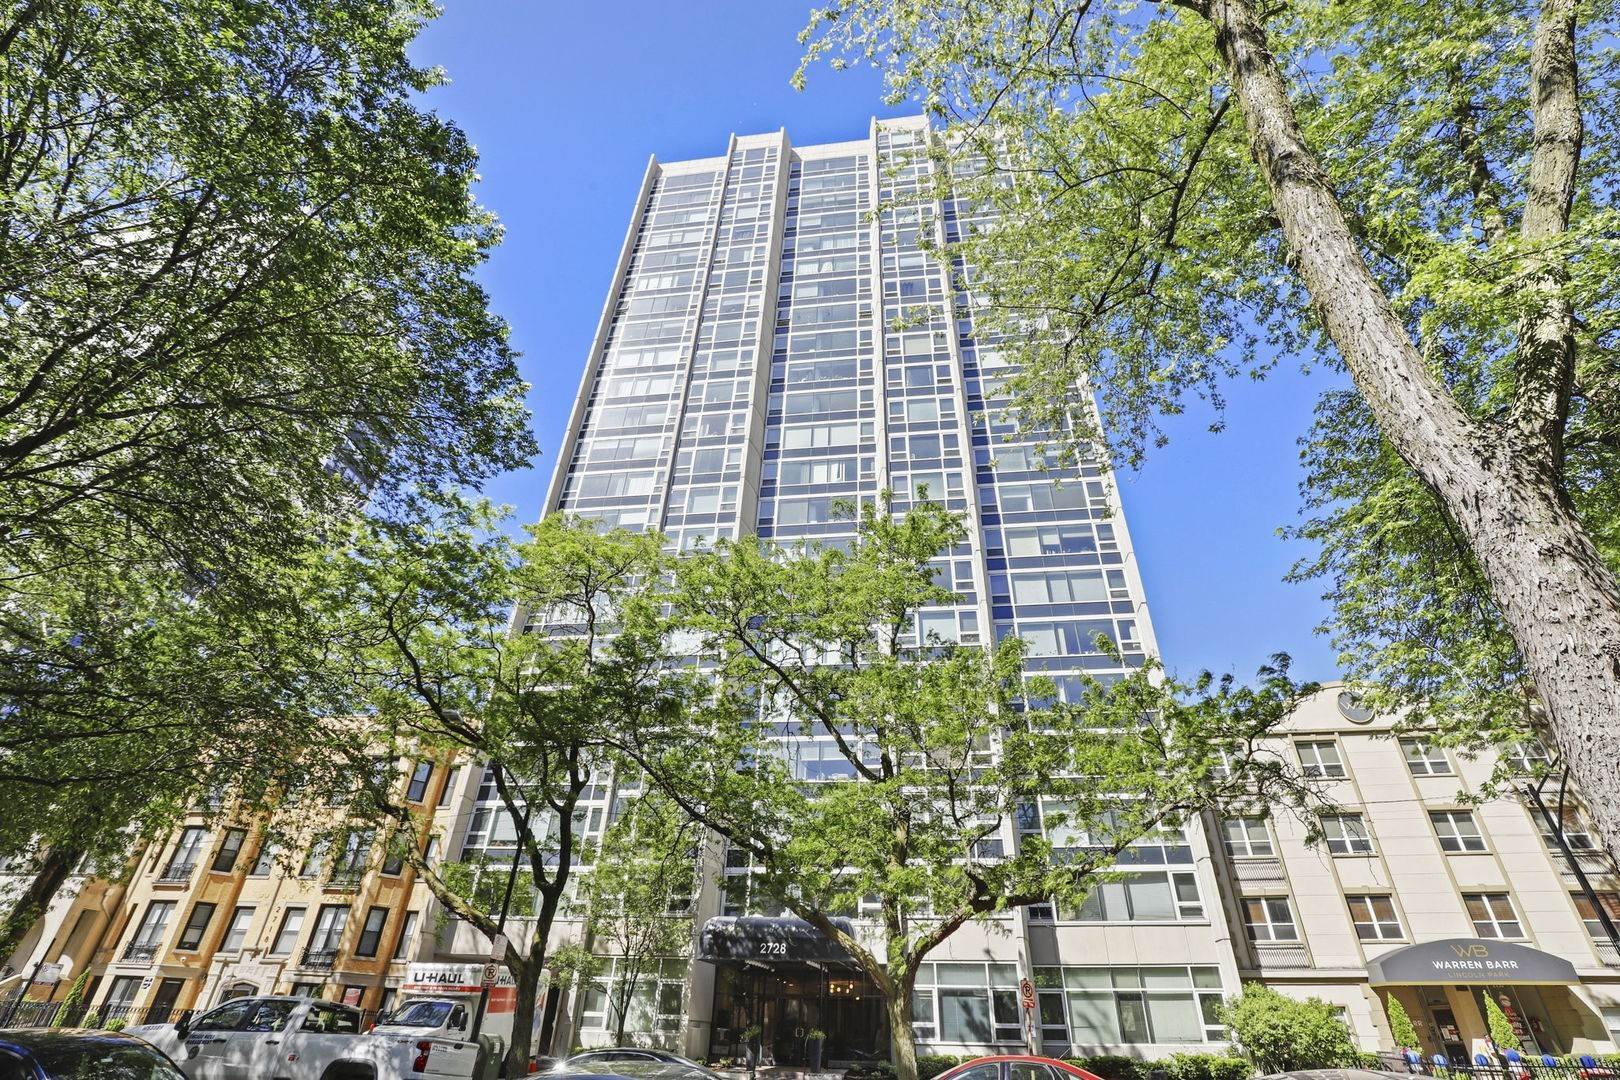 Single Family for Sale at Park West, Chicago, IL 60614